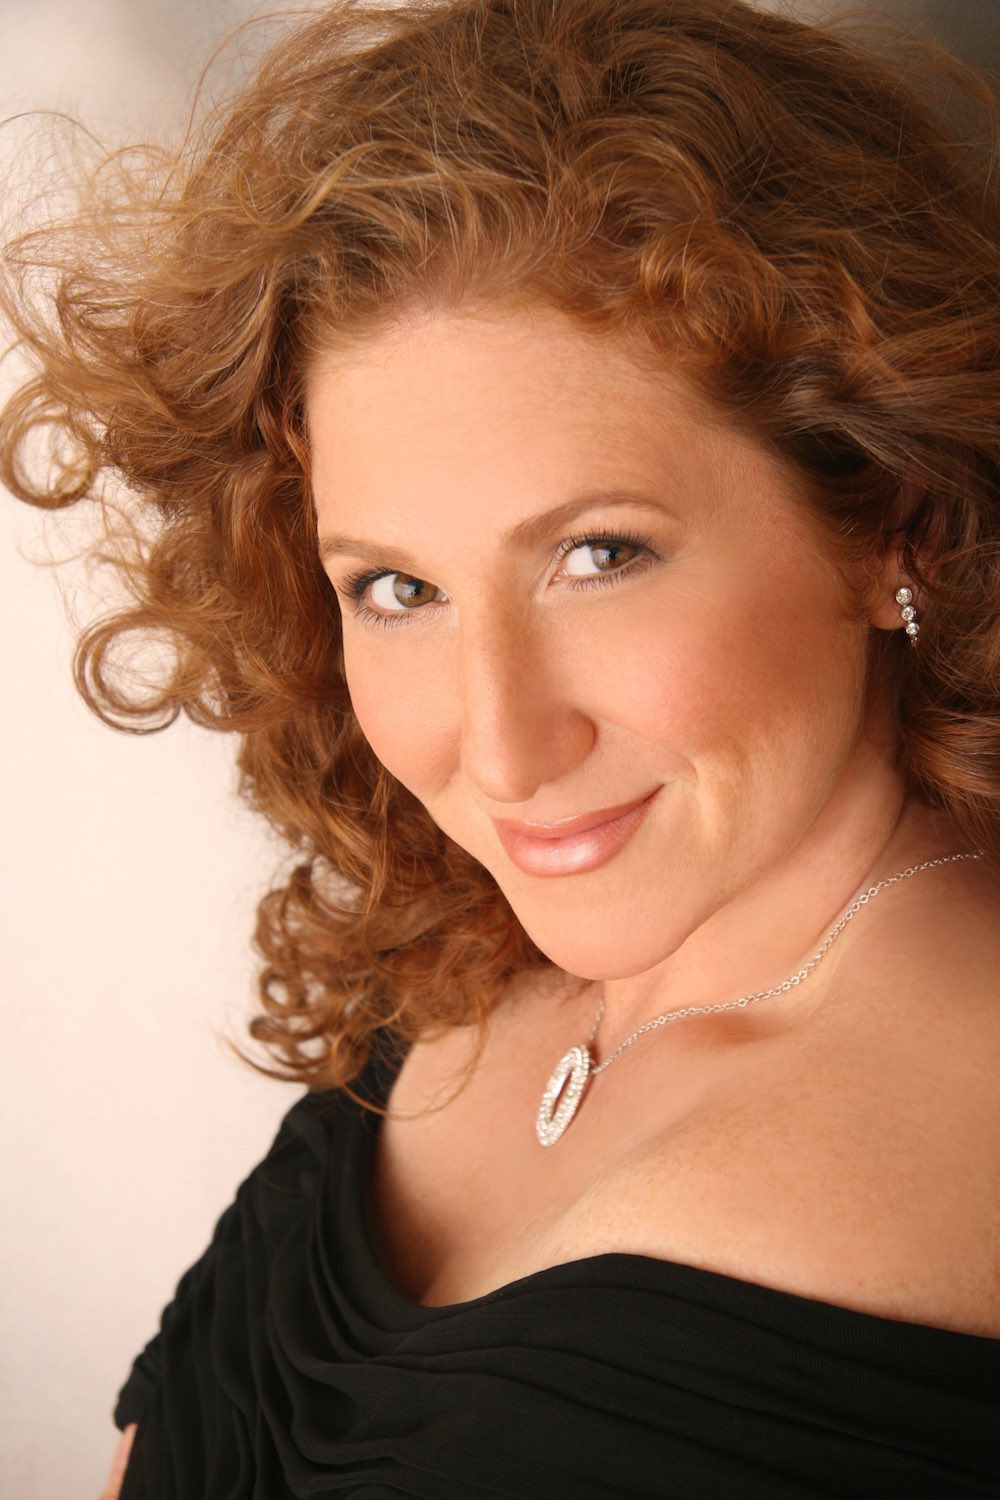 Gallery 2 - Soprano Esther Heideman has performed the “Messiah” more than 100 times.